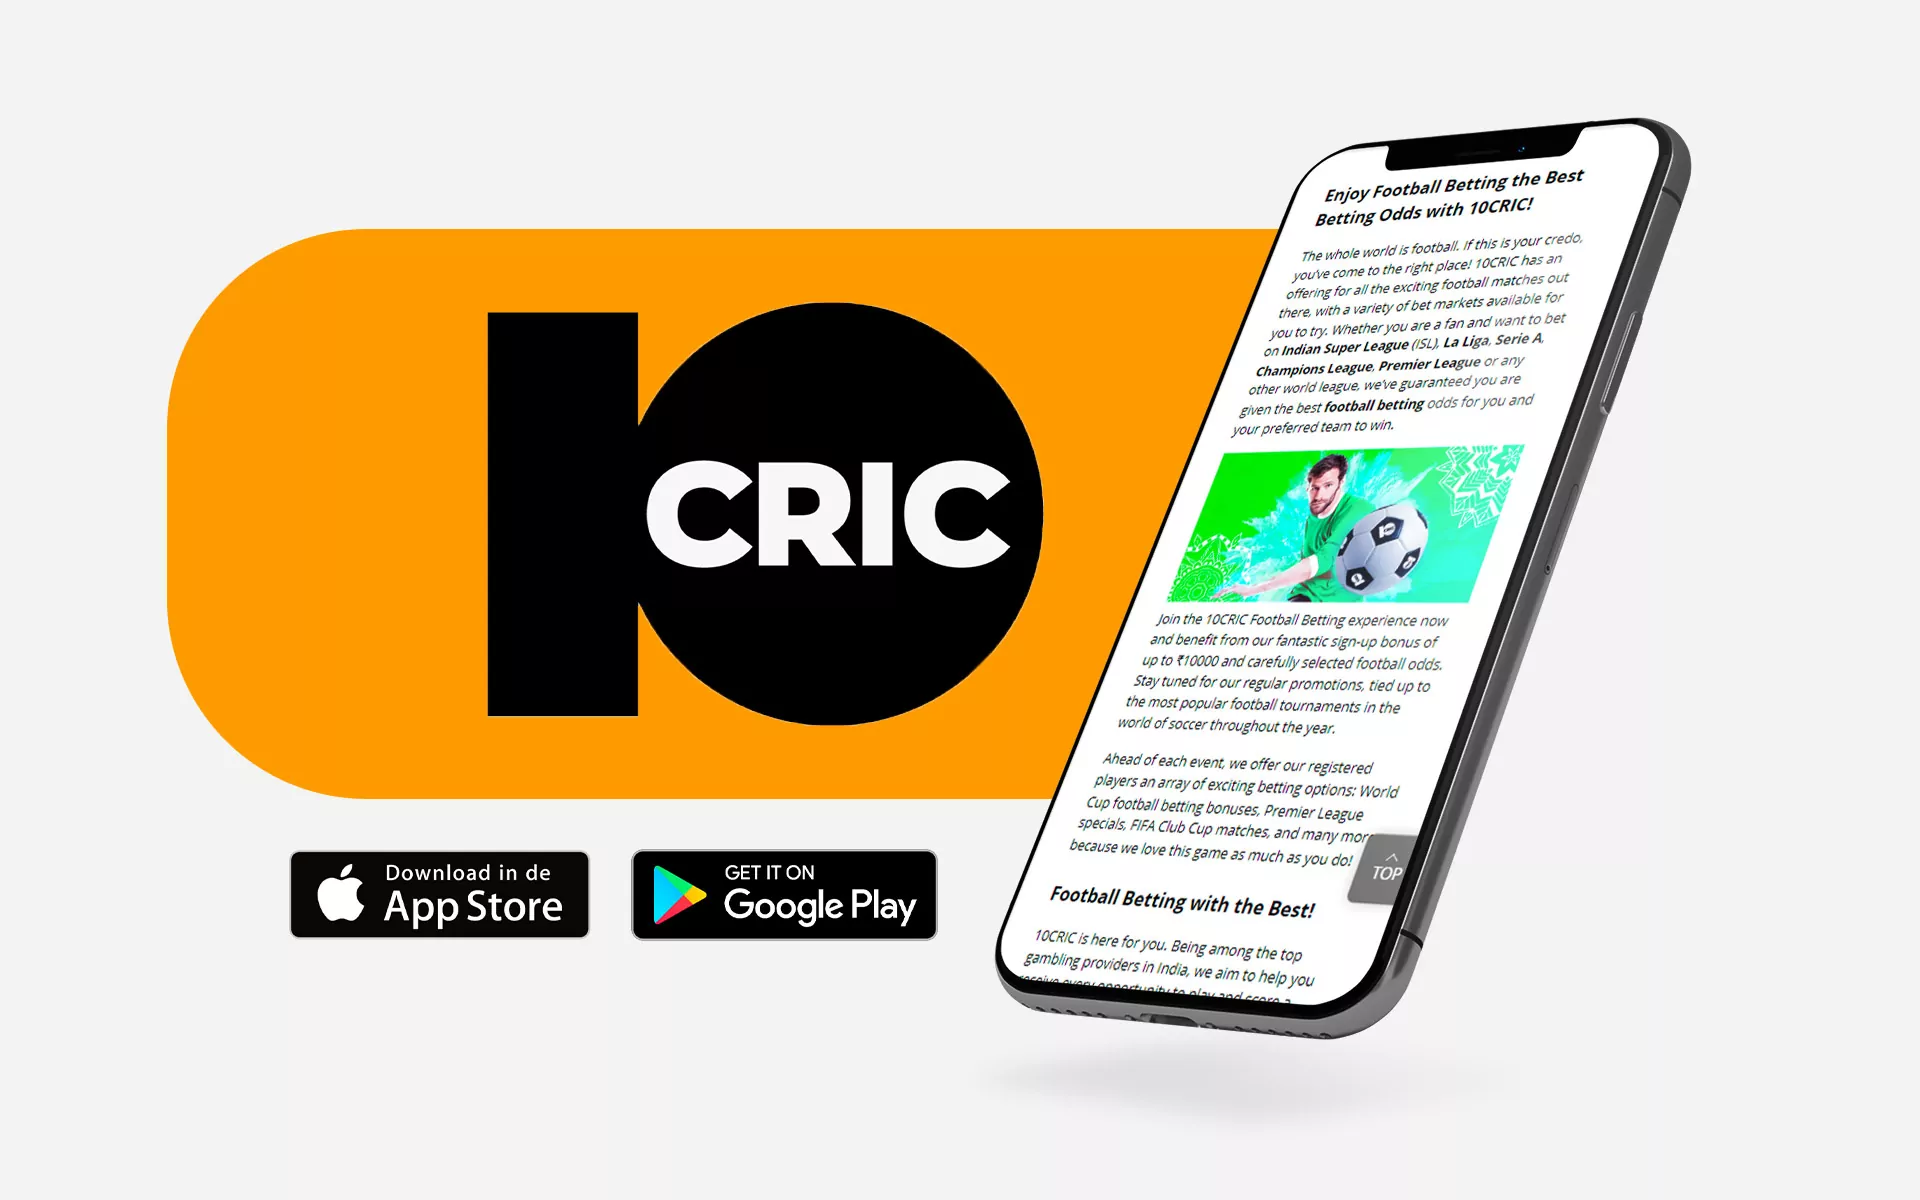 Bet on football with 10cric online betting site in Bangladesh.